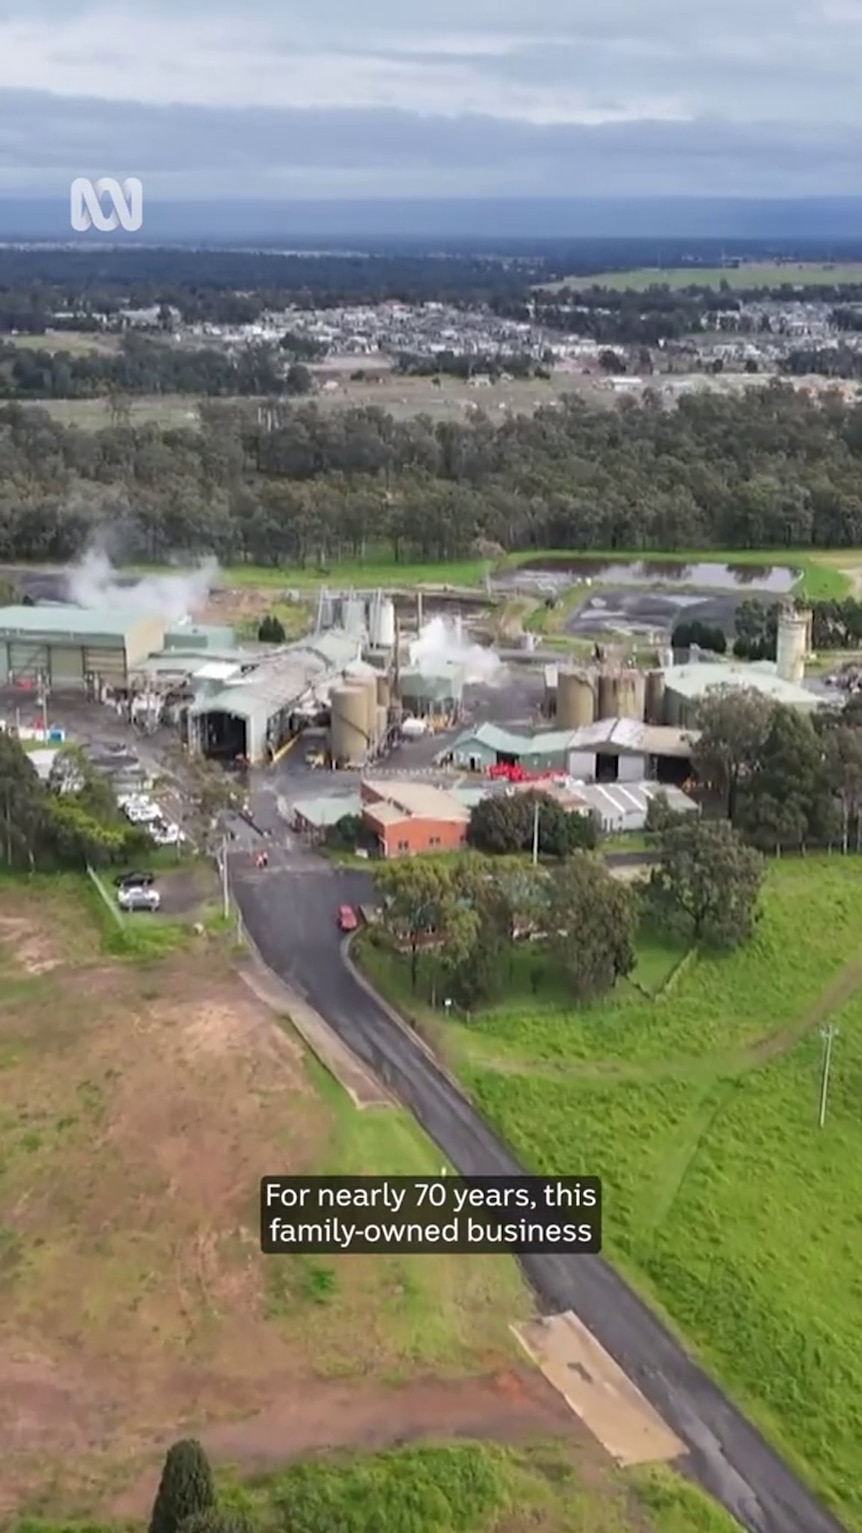 a drone shot shows an industrial premises surrounded by green paddocks with residential areas visible in the background